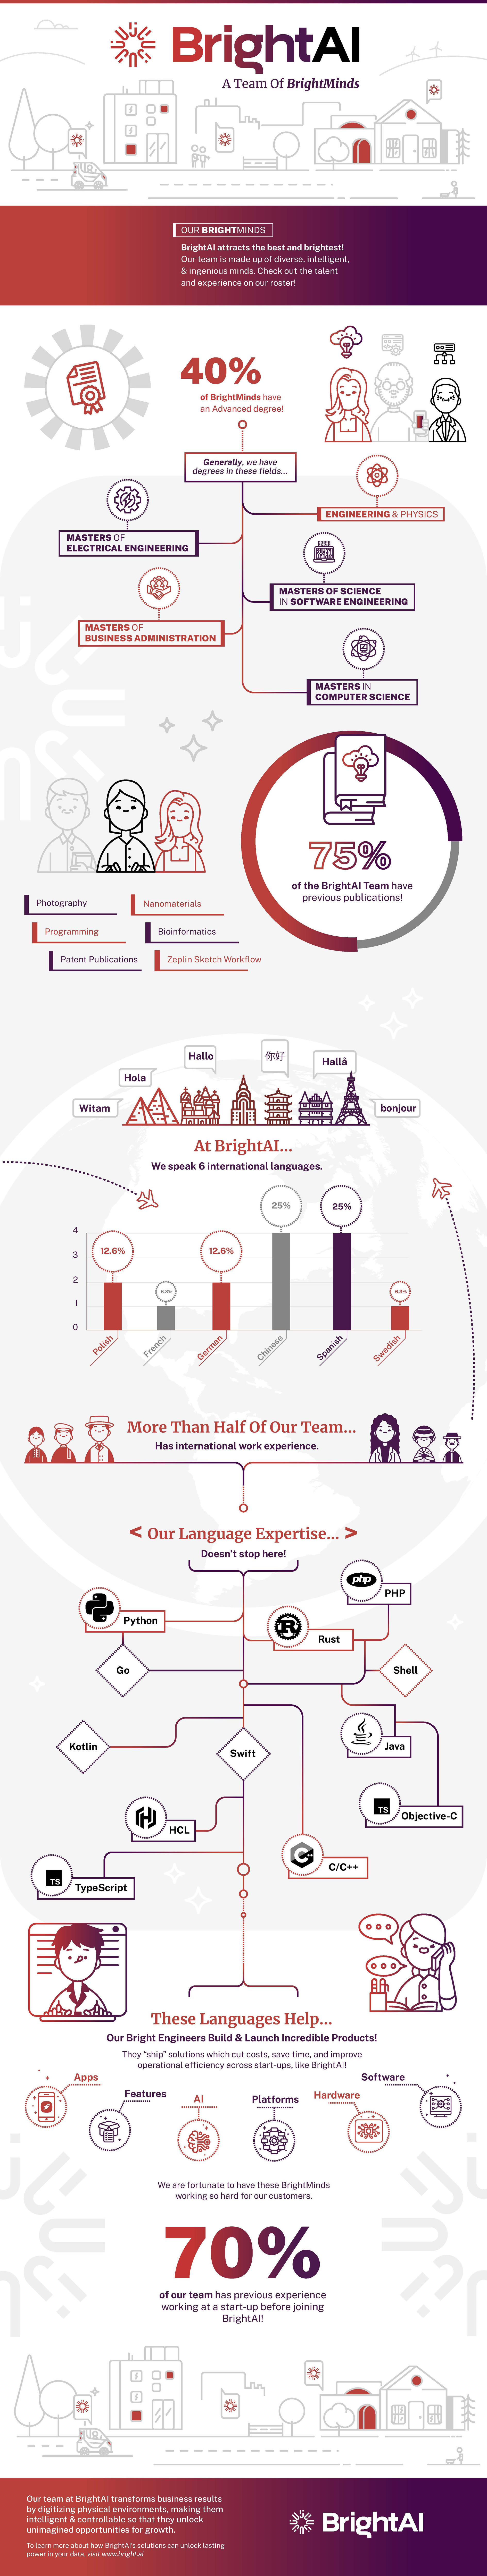 a team of bright minds at Bright AI infographic with various illustrations and statistics